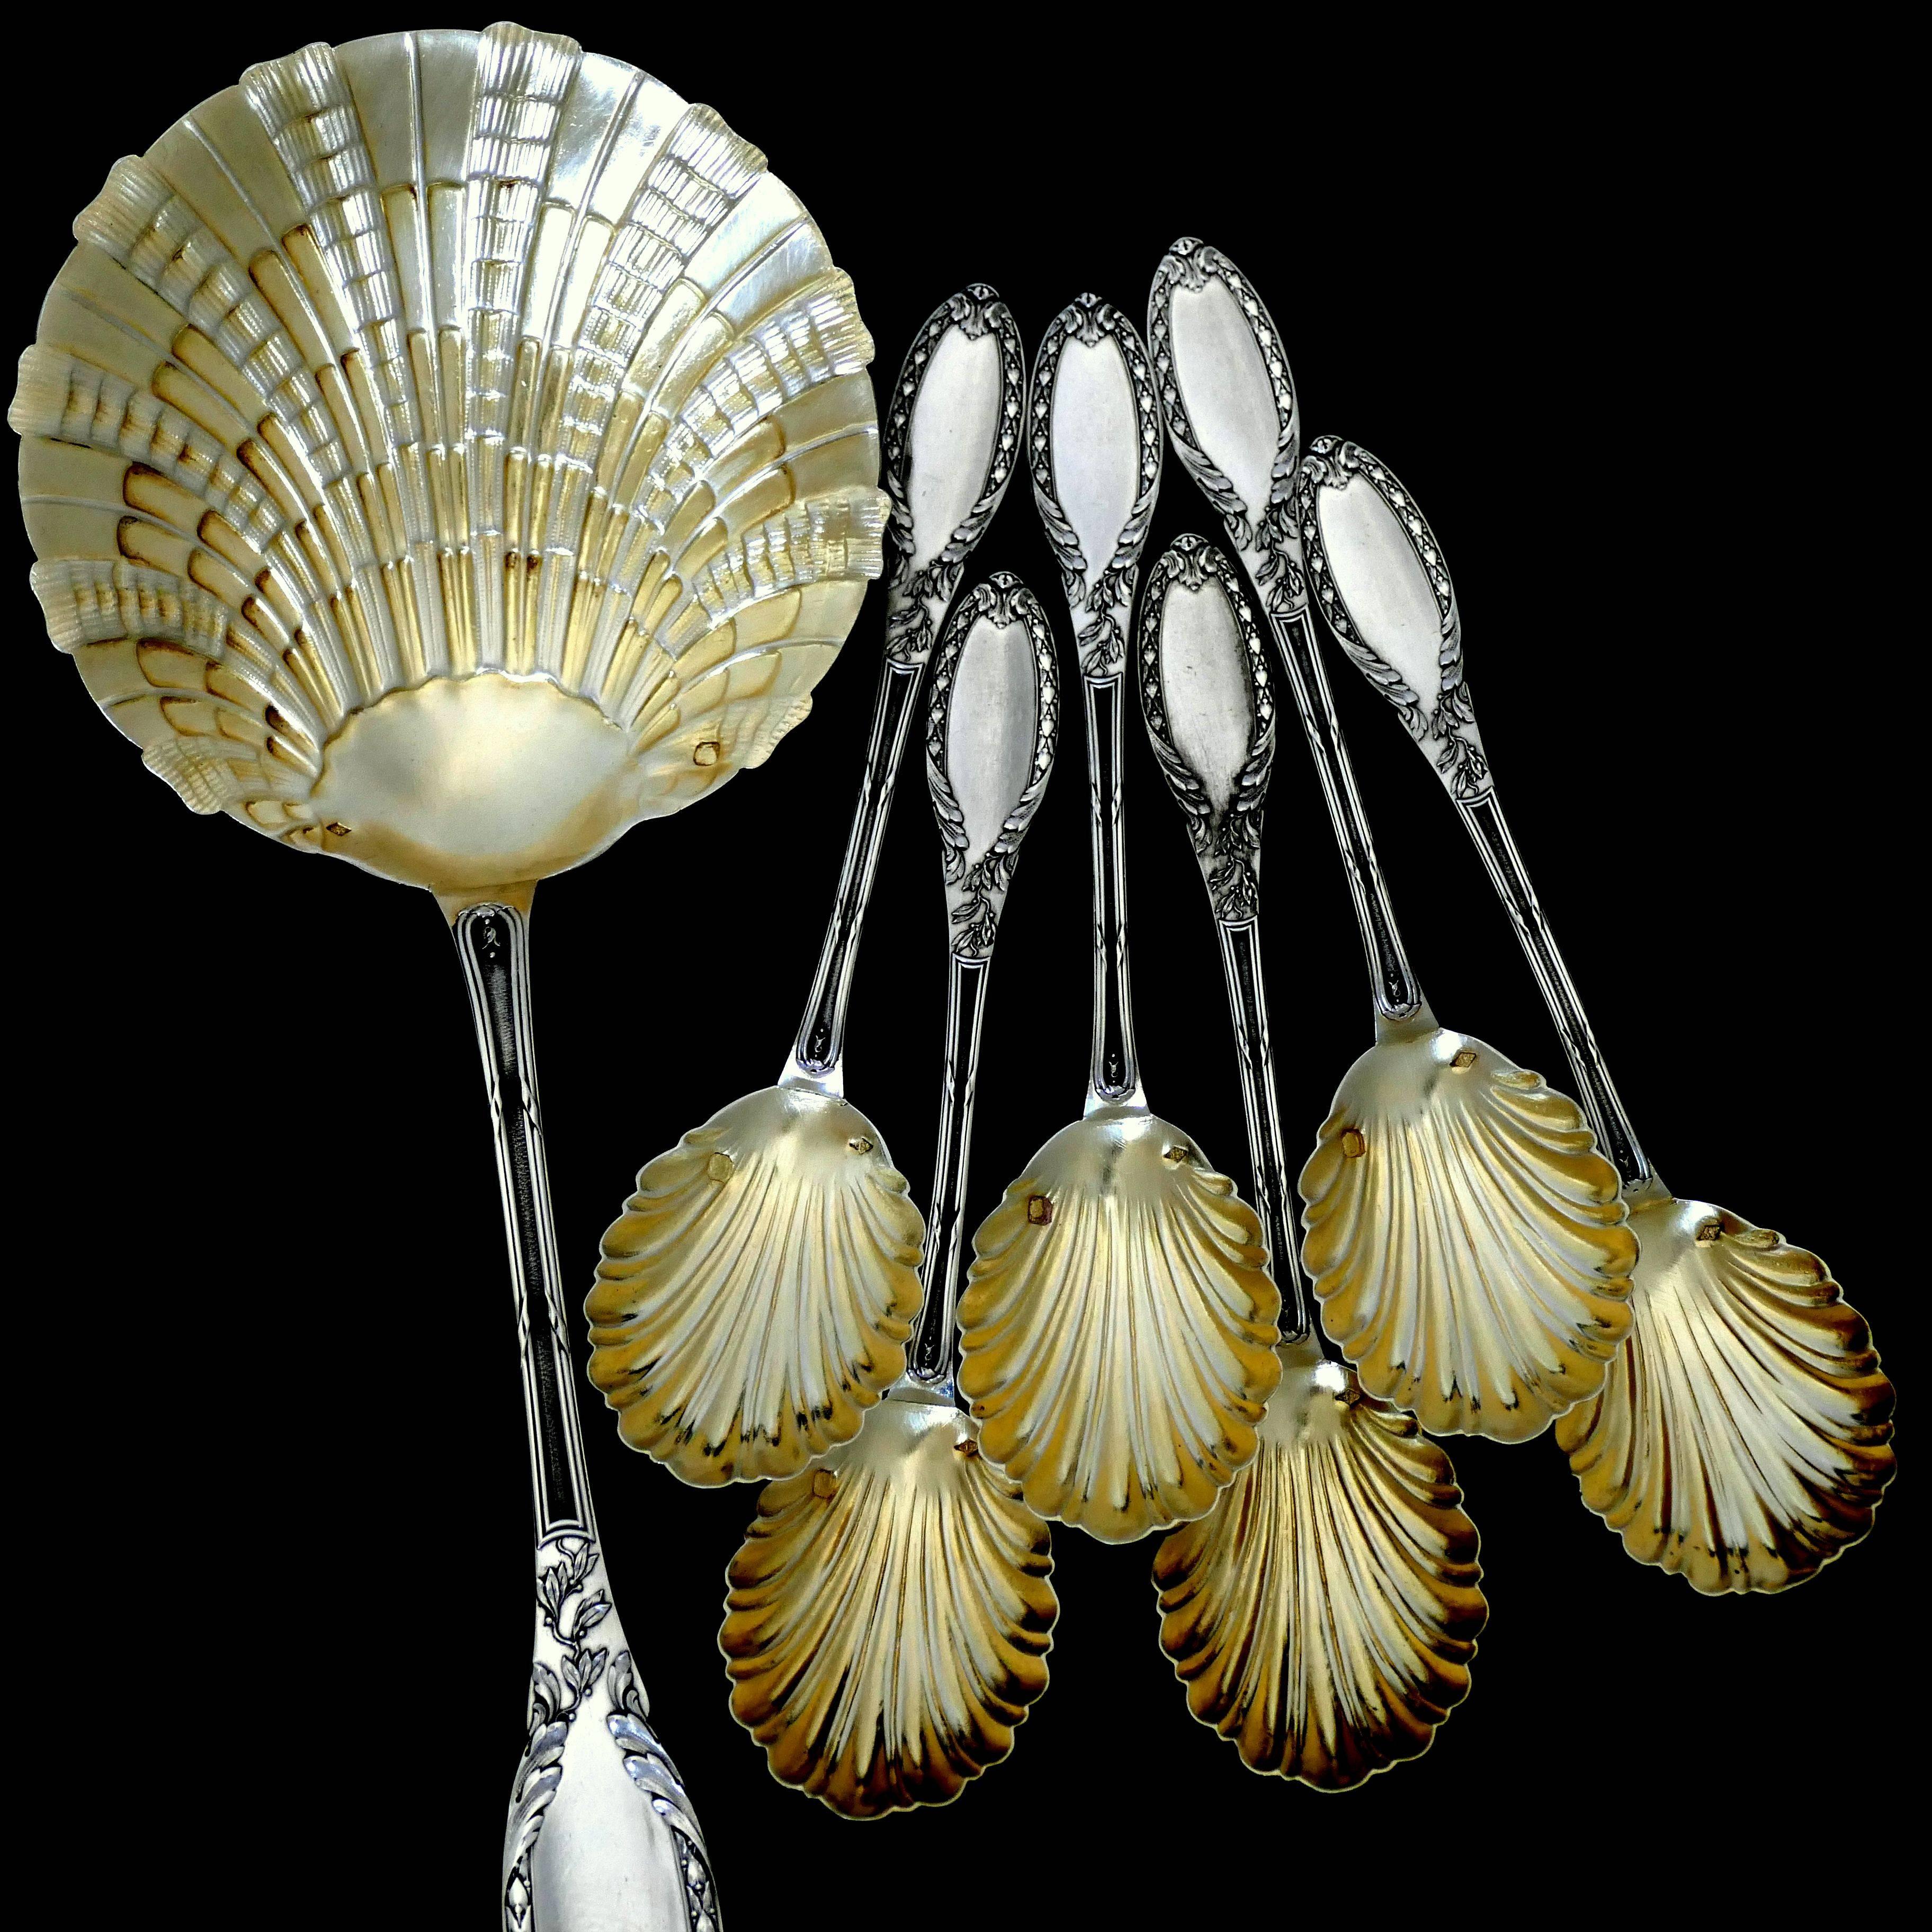 Late 19th Century Rare French Sterling Silver 18-Karat Gold Strawberry Service Seven-Piece For Sale